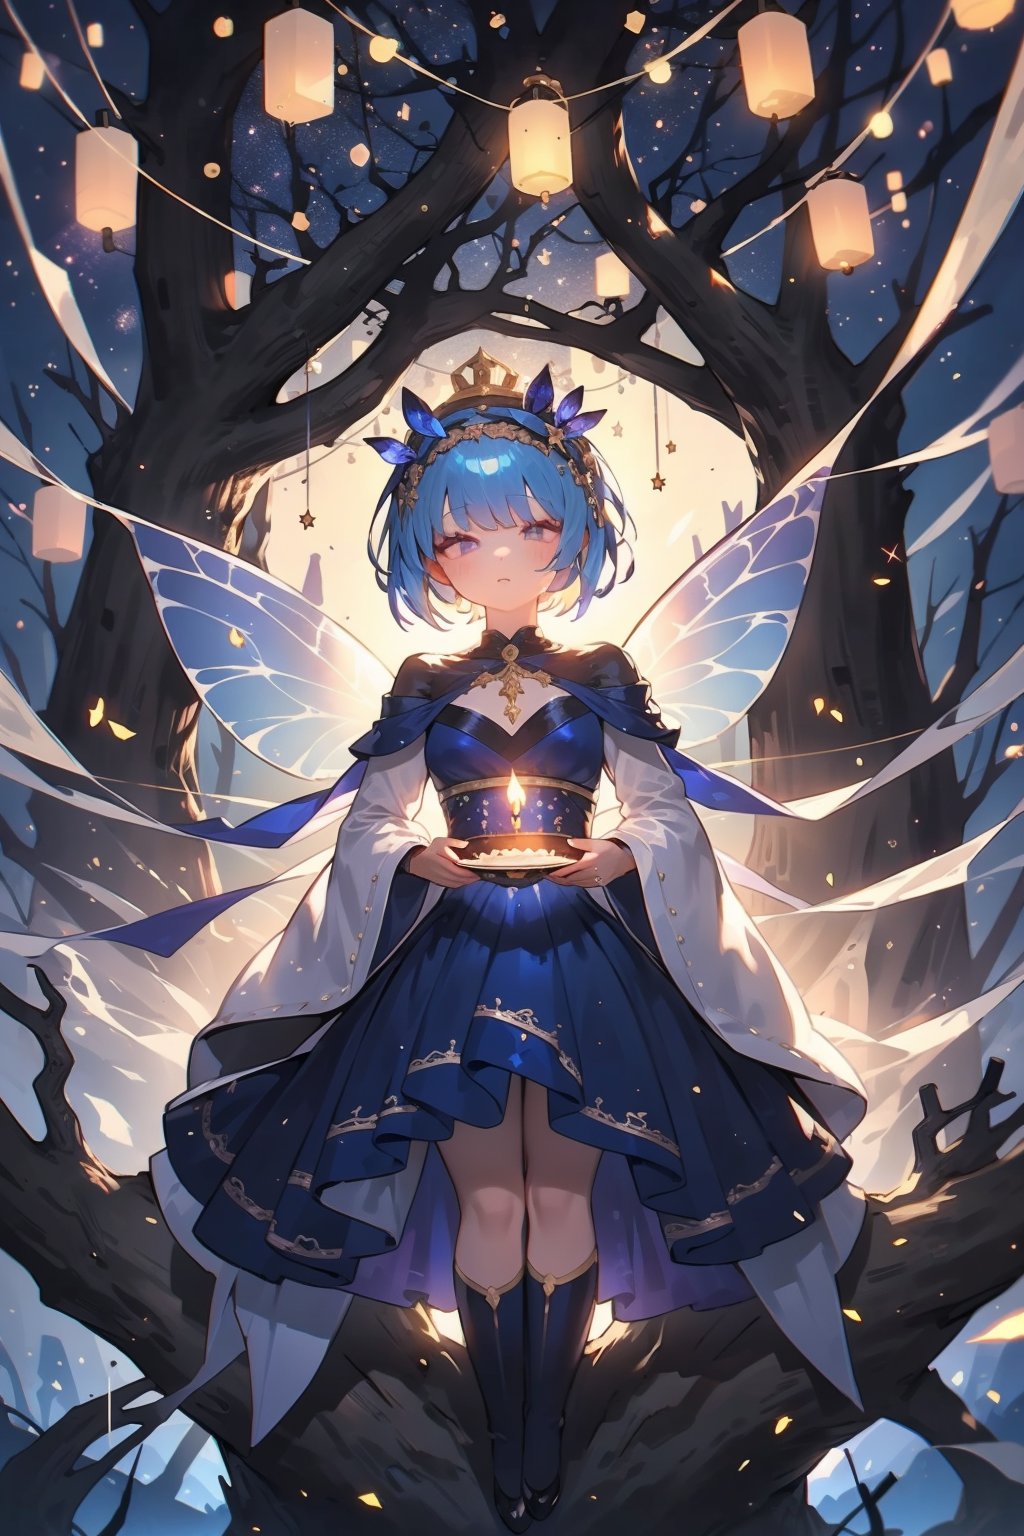 A whimsical scene unfolds on a sparkling nightdream of an anniversary celebration. One fairy girl, with blue locks aglow, perches atop a gnarled tree branch, surrounded by a canopy of twinkling stars. A majestic tree trunk serves as the centerpiece, adorned with a decadent cake, its candles lit like tiny lanterns. The air is enchanted with magic, as the fairy's delicate wings shimmer in harmony with the celestial display.,EpicSky